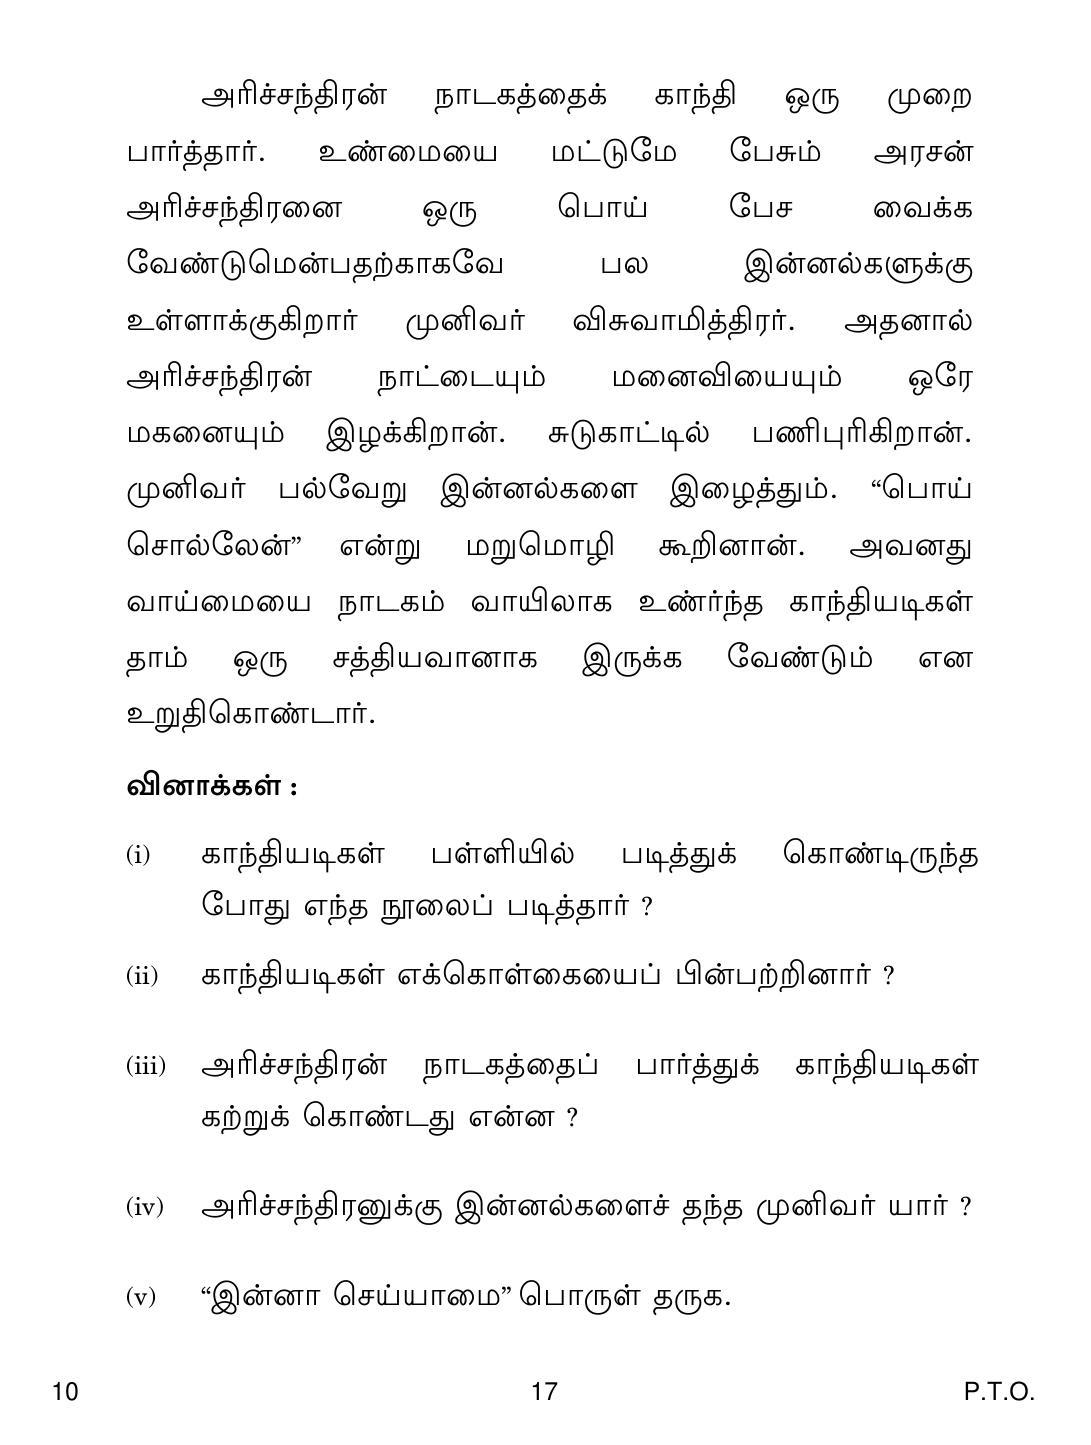 CBSE Class 10 10 Tamil 2019 Question Paper - Page 17